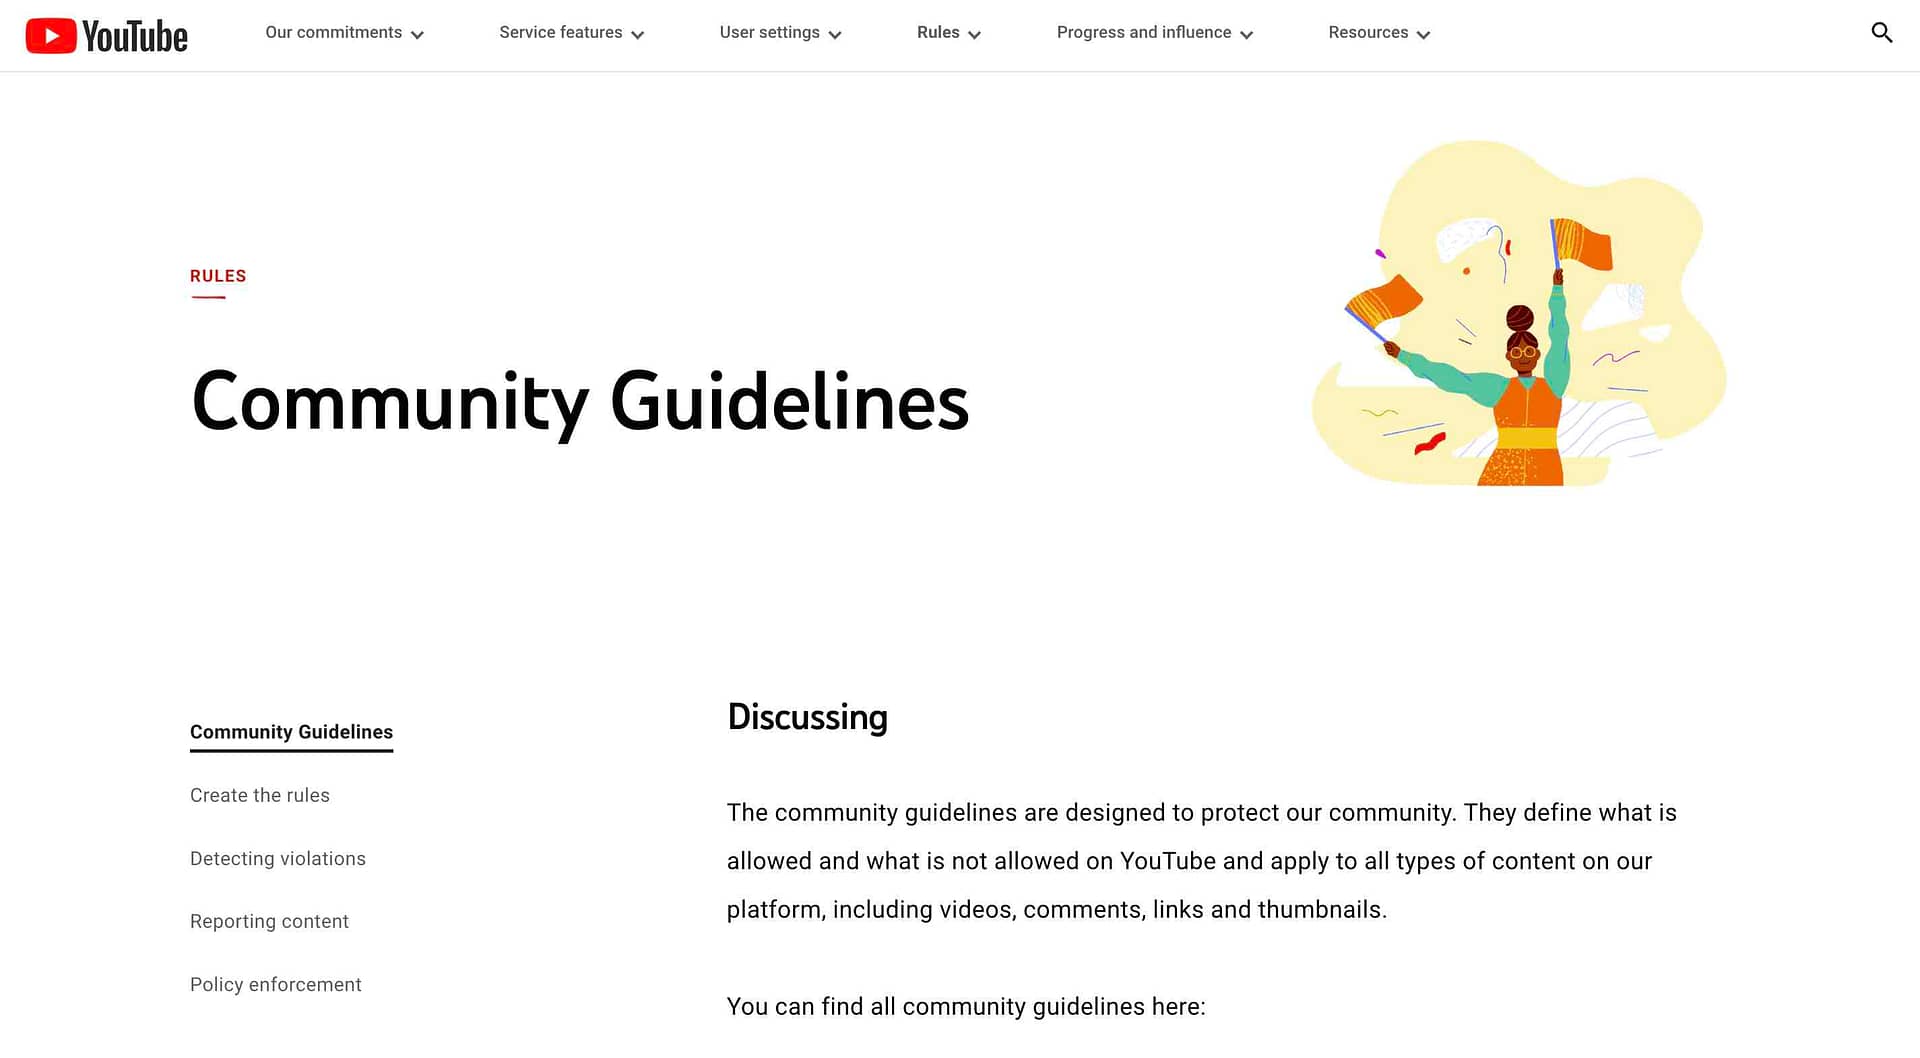 YouTube community guidelines